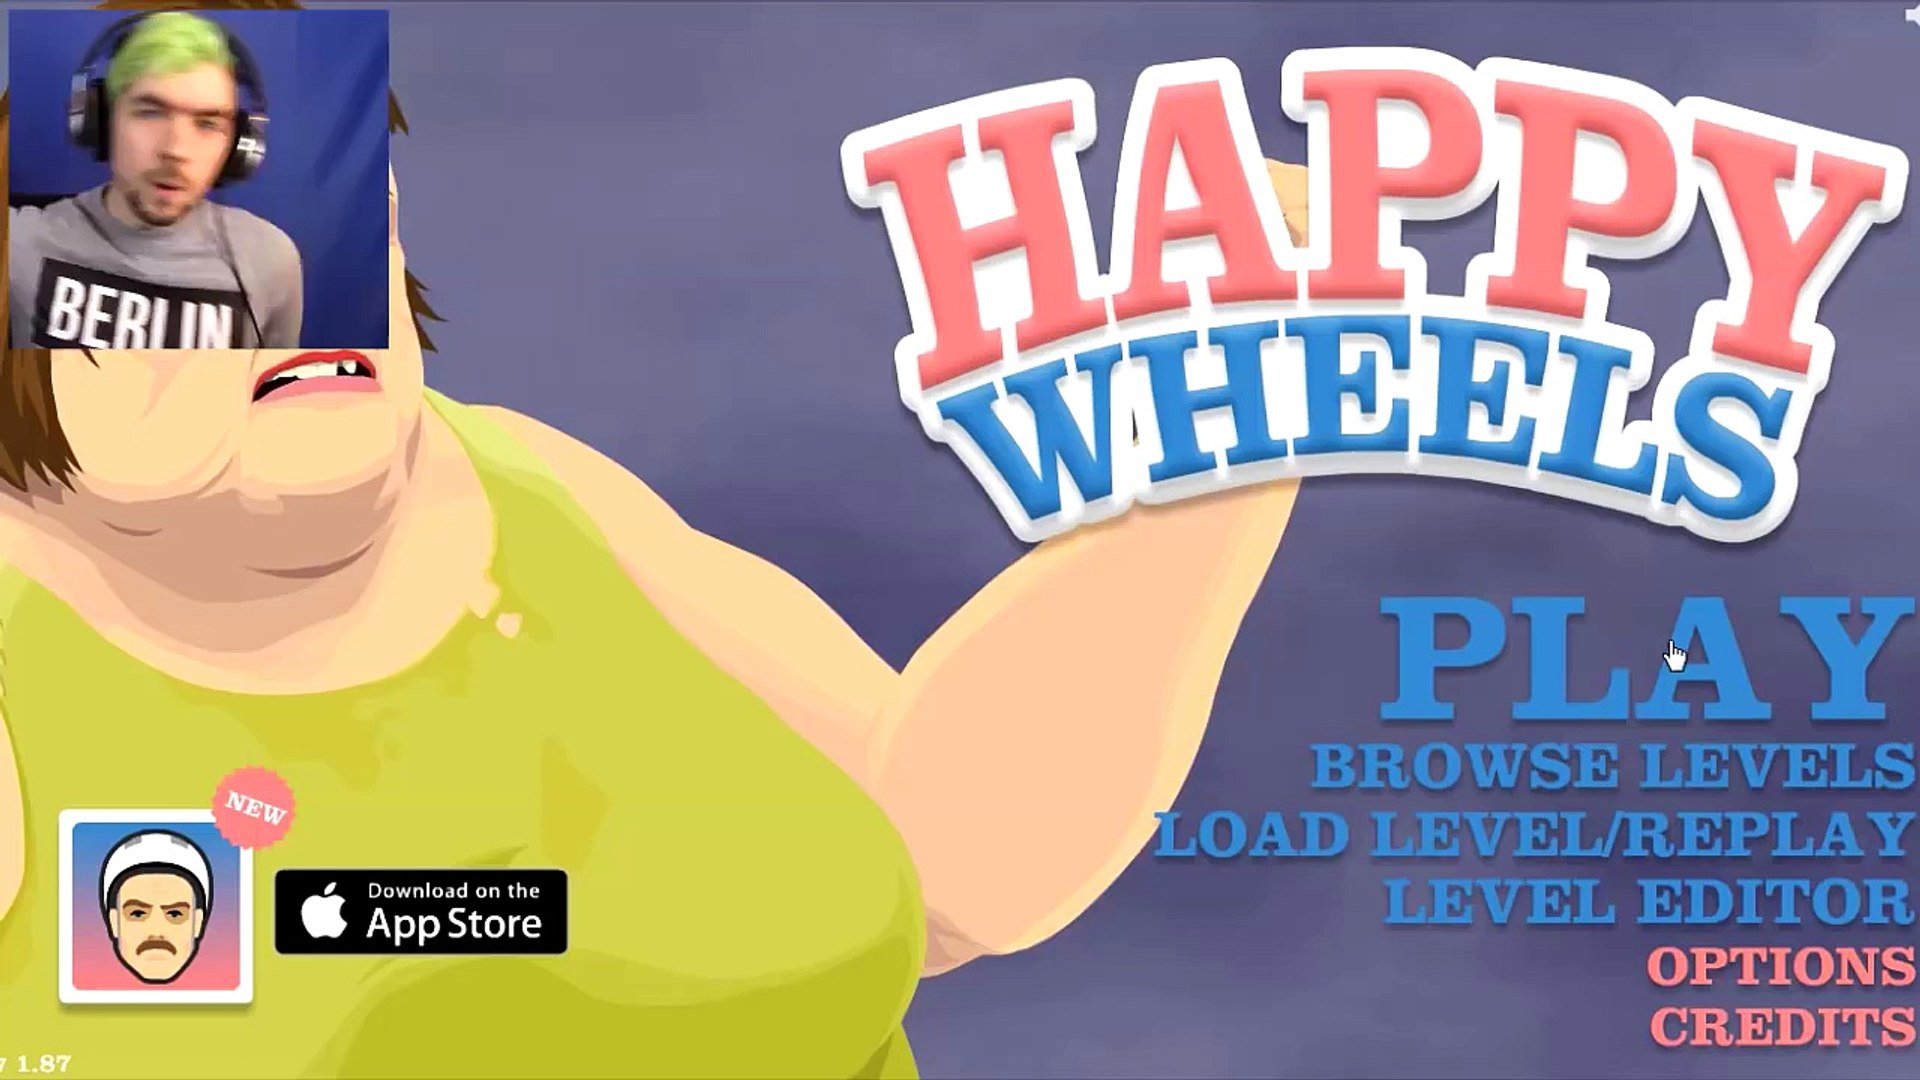 WOULD YOU RATHER?  Happy Wheels Part 87 - Dailymotion Video